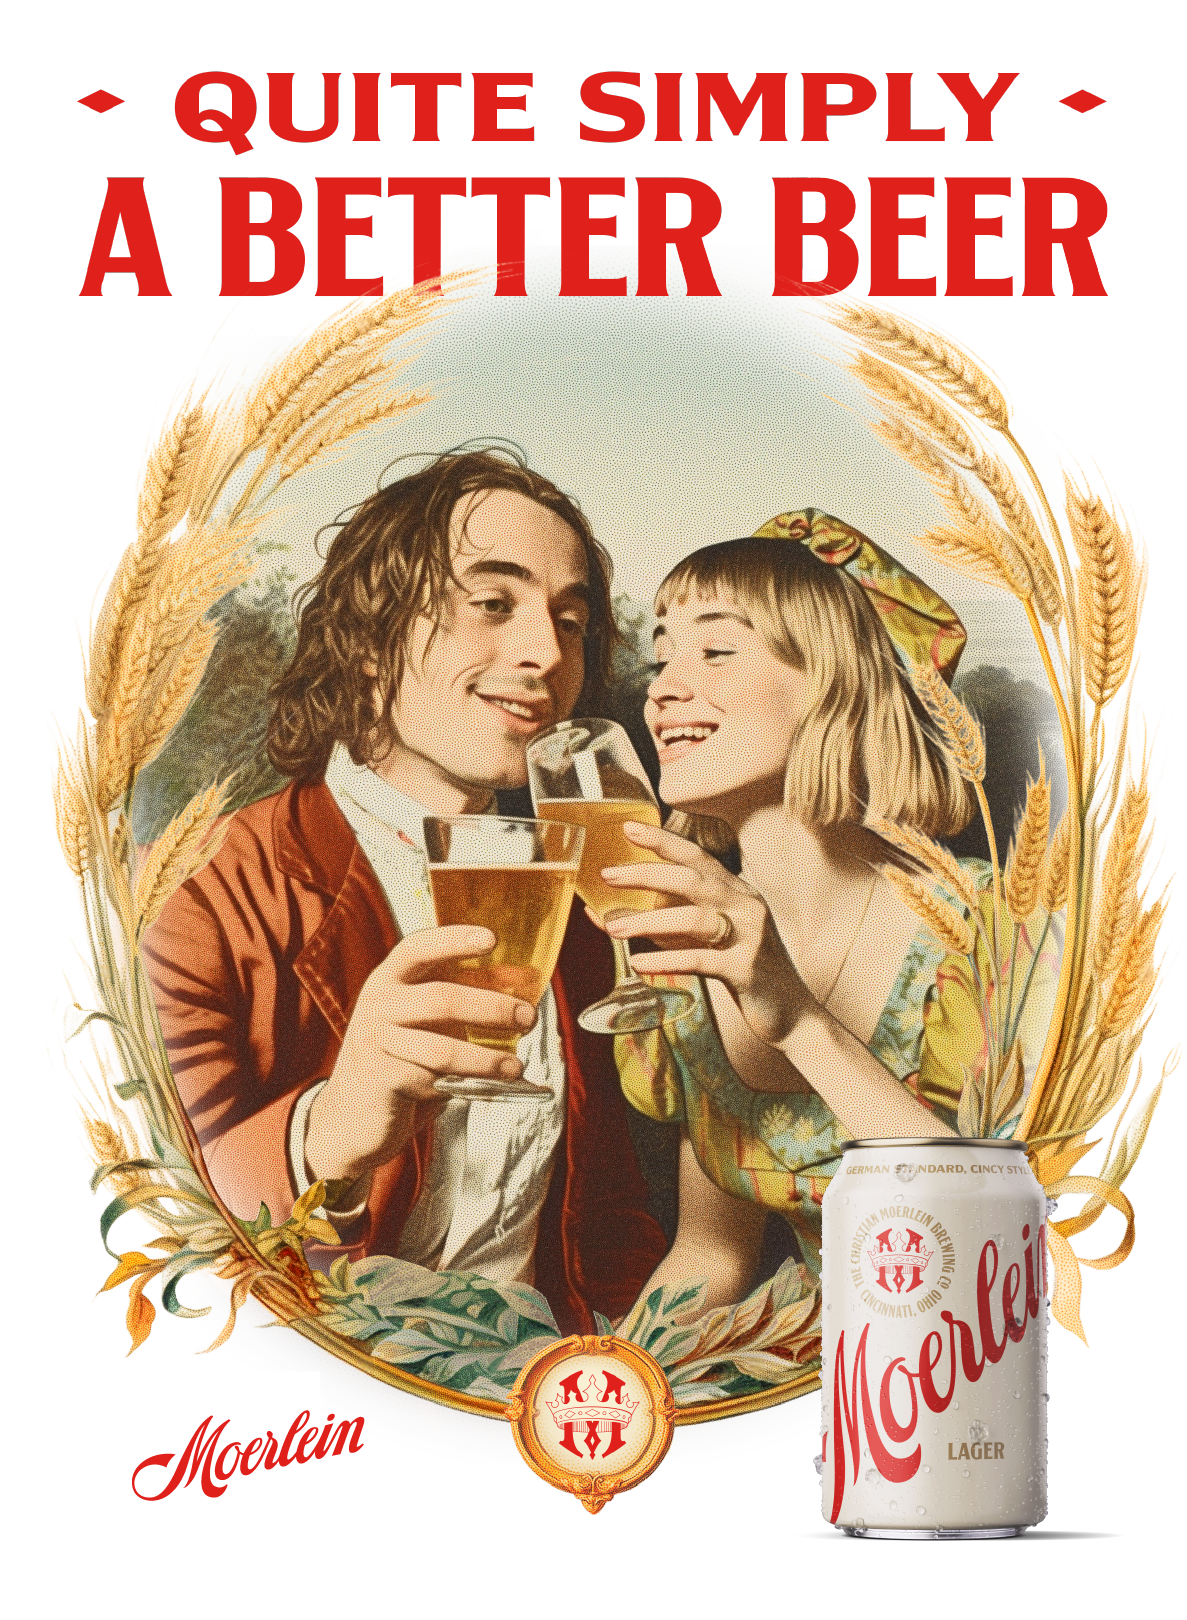 "Quite Simply A Better Beer" text over a young couple sharing a cheers of Christian Moerlein Lager